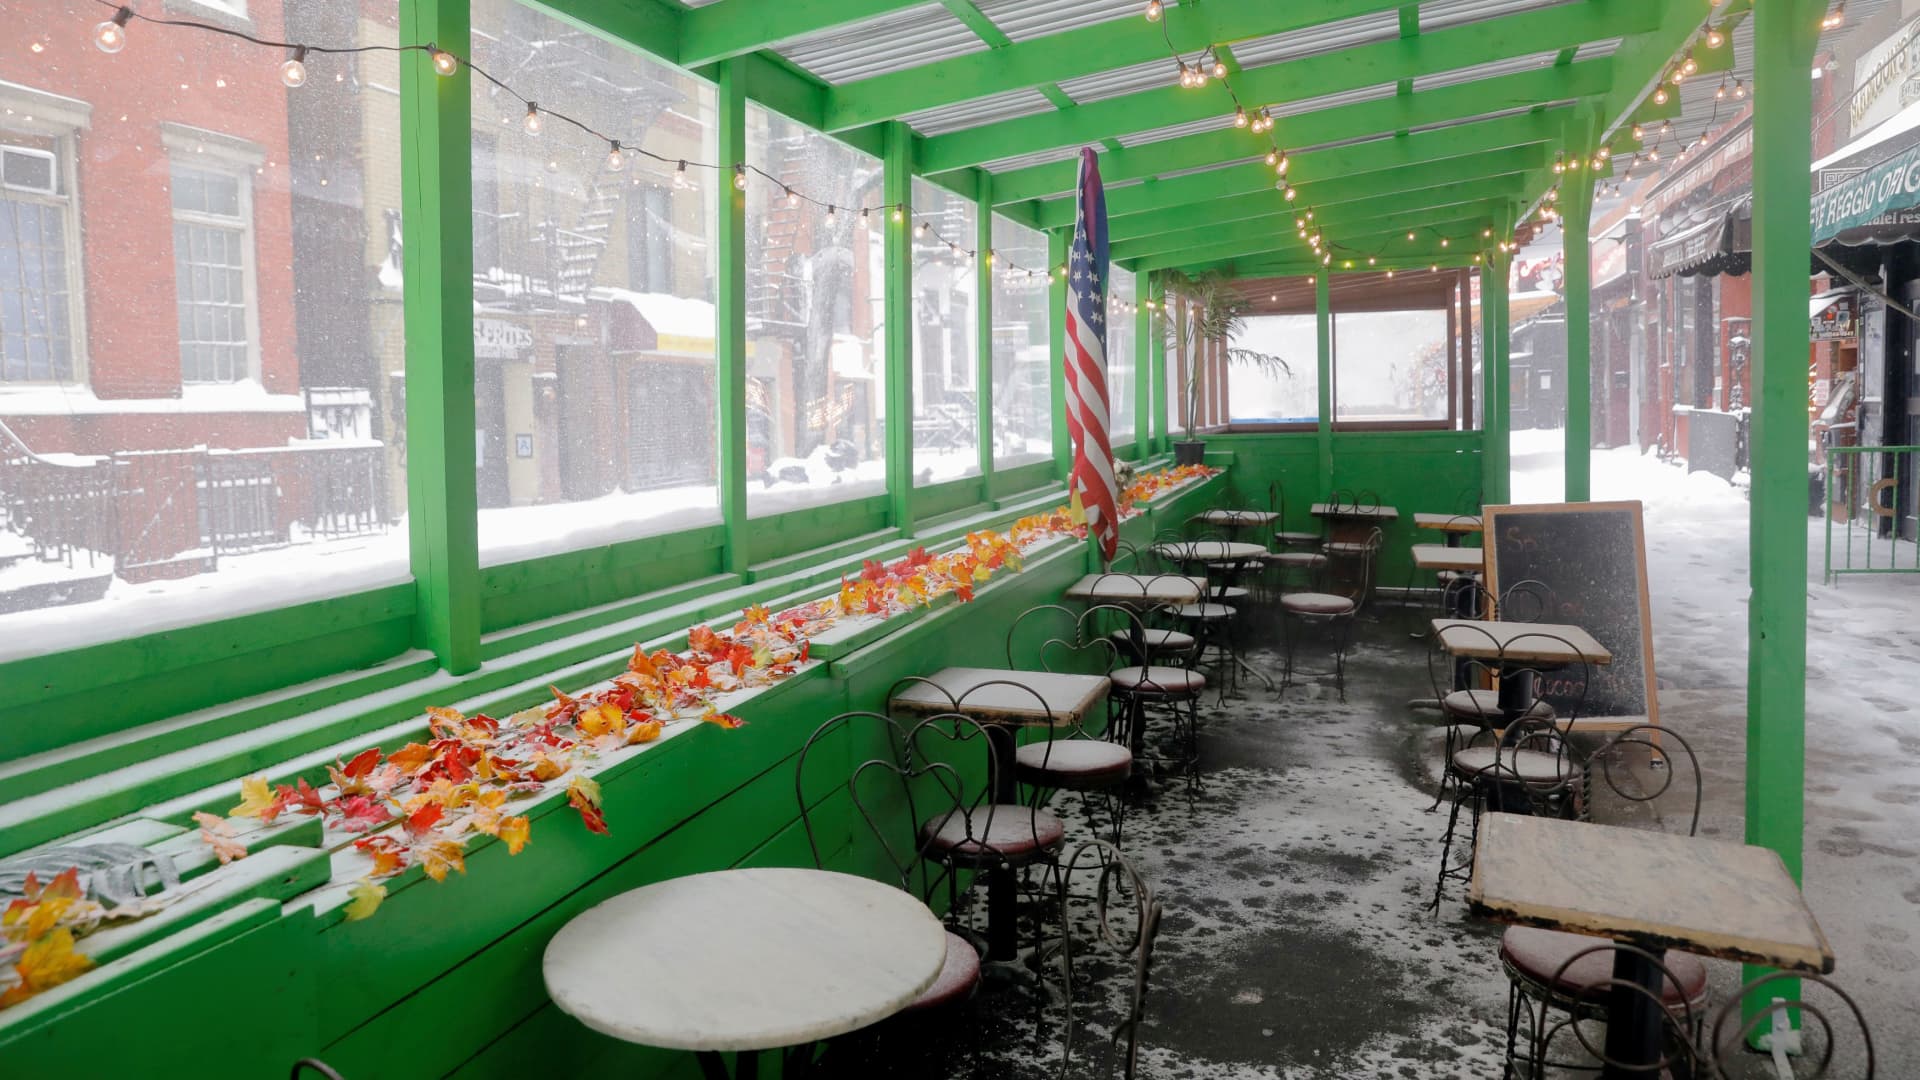 An outdoor eating area is seen in Greenwich Village neighborhood during a snow storm, amid the coronavirus disease (COVID-19) outbreak, in the Manhattan borough of New York City, February 1, 2021.